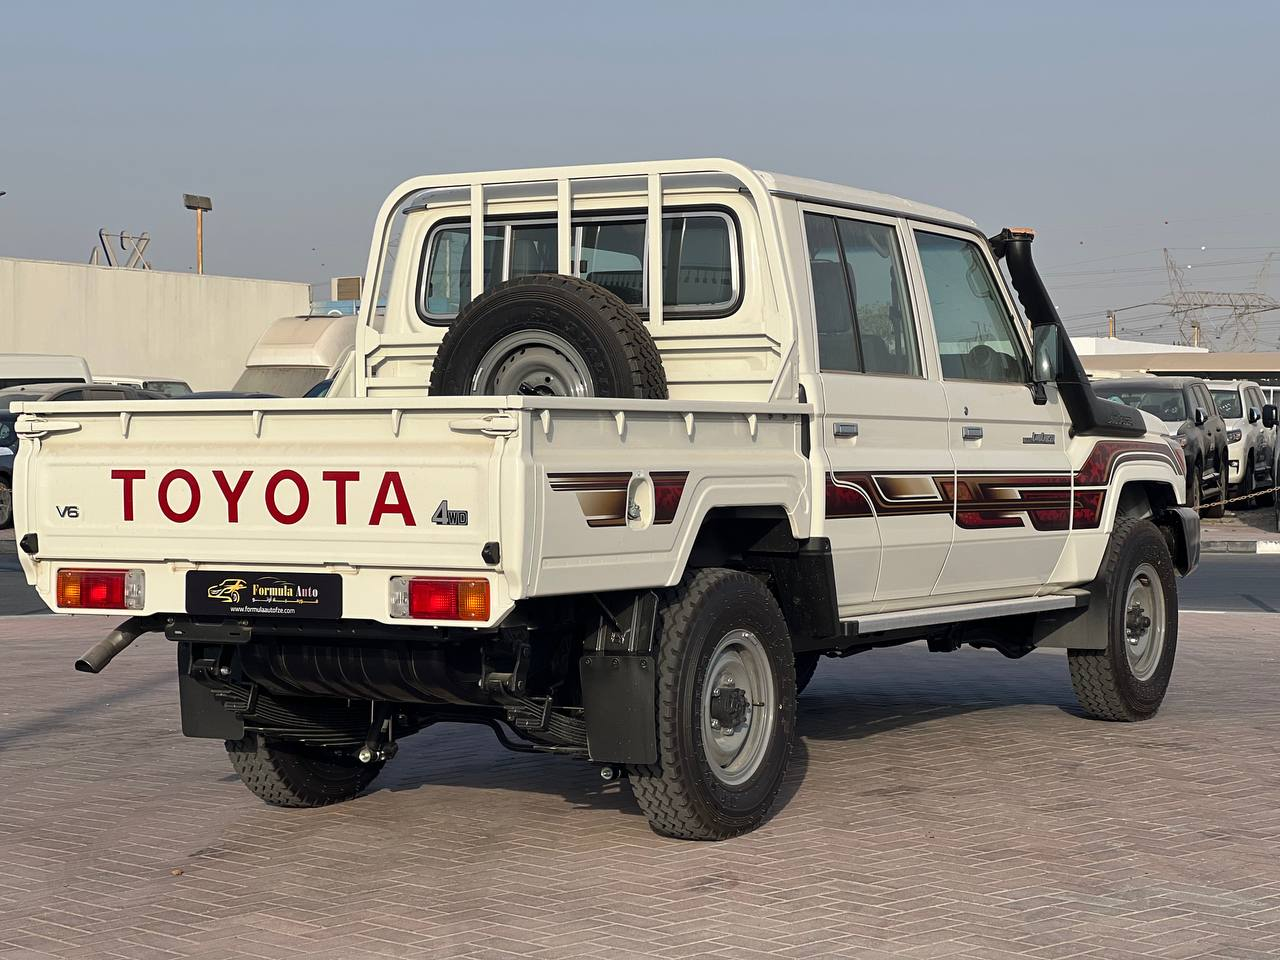 Purchasing and Exporting Your Land Cruiser Online